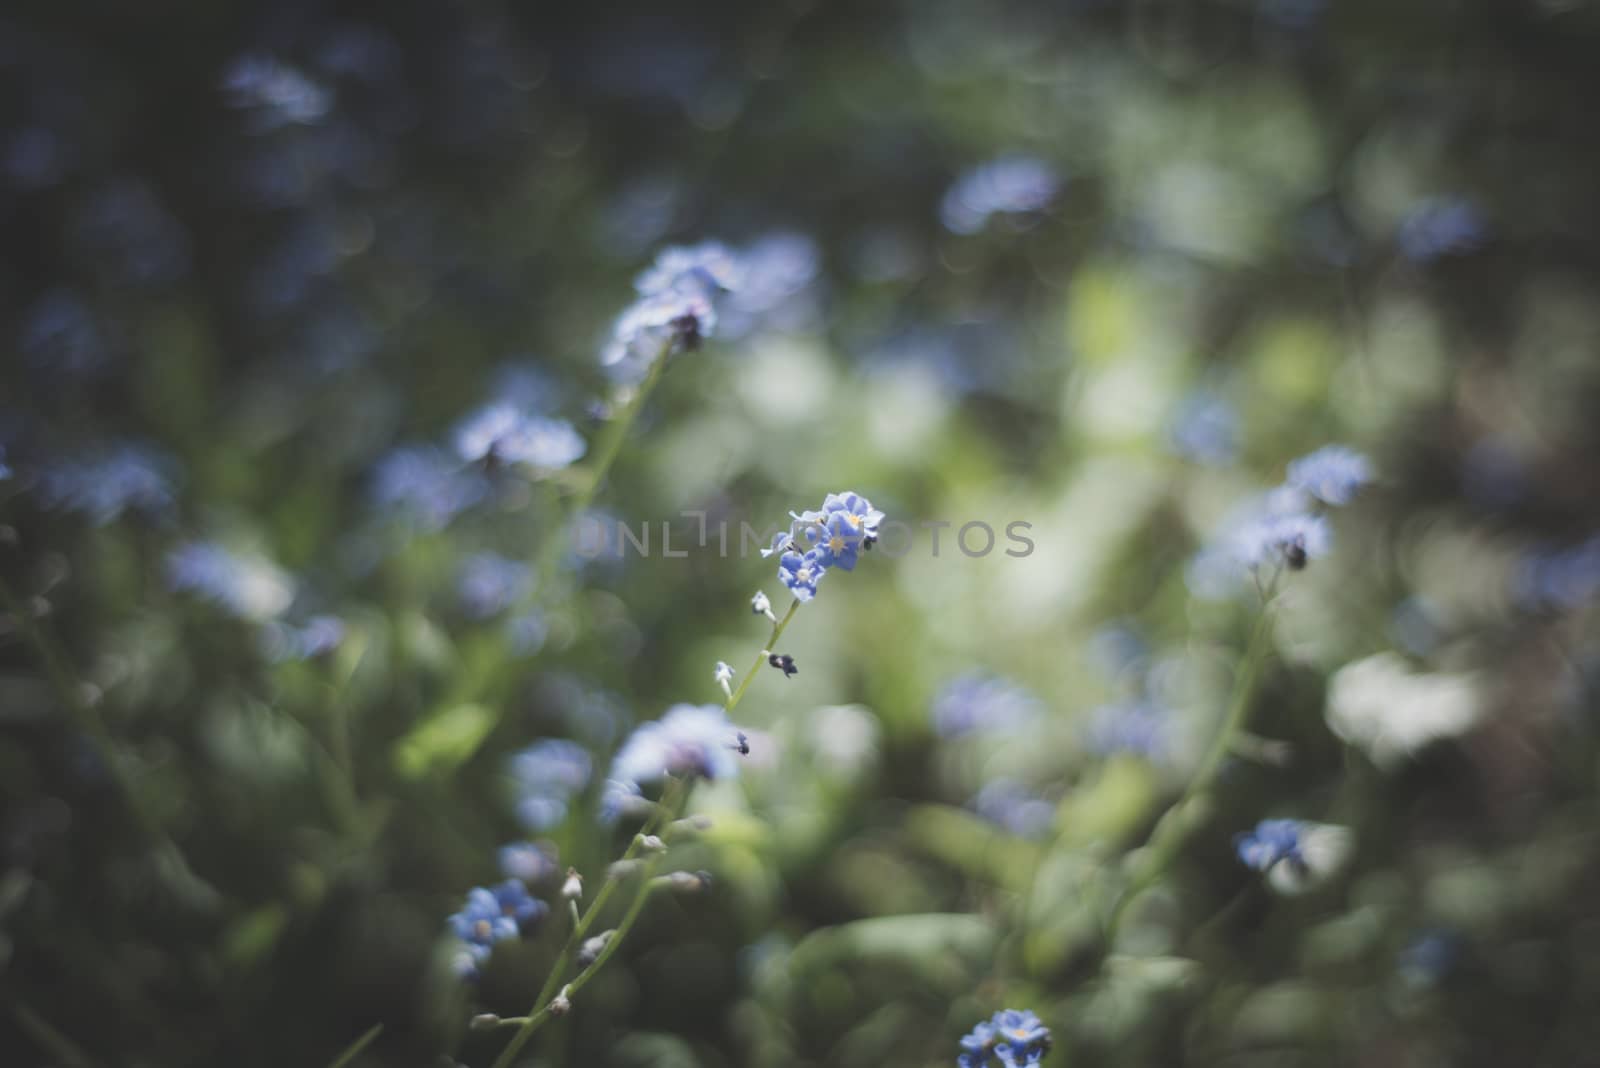 close up of sunlit forget-me-nots shalllow depth of field by paddythegolfer